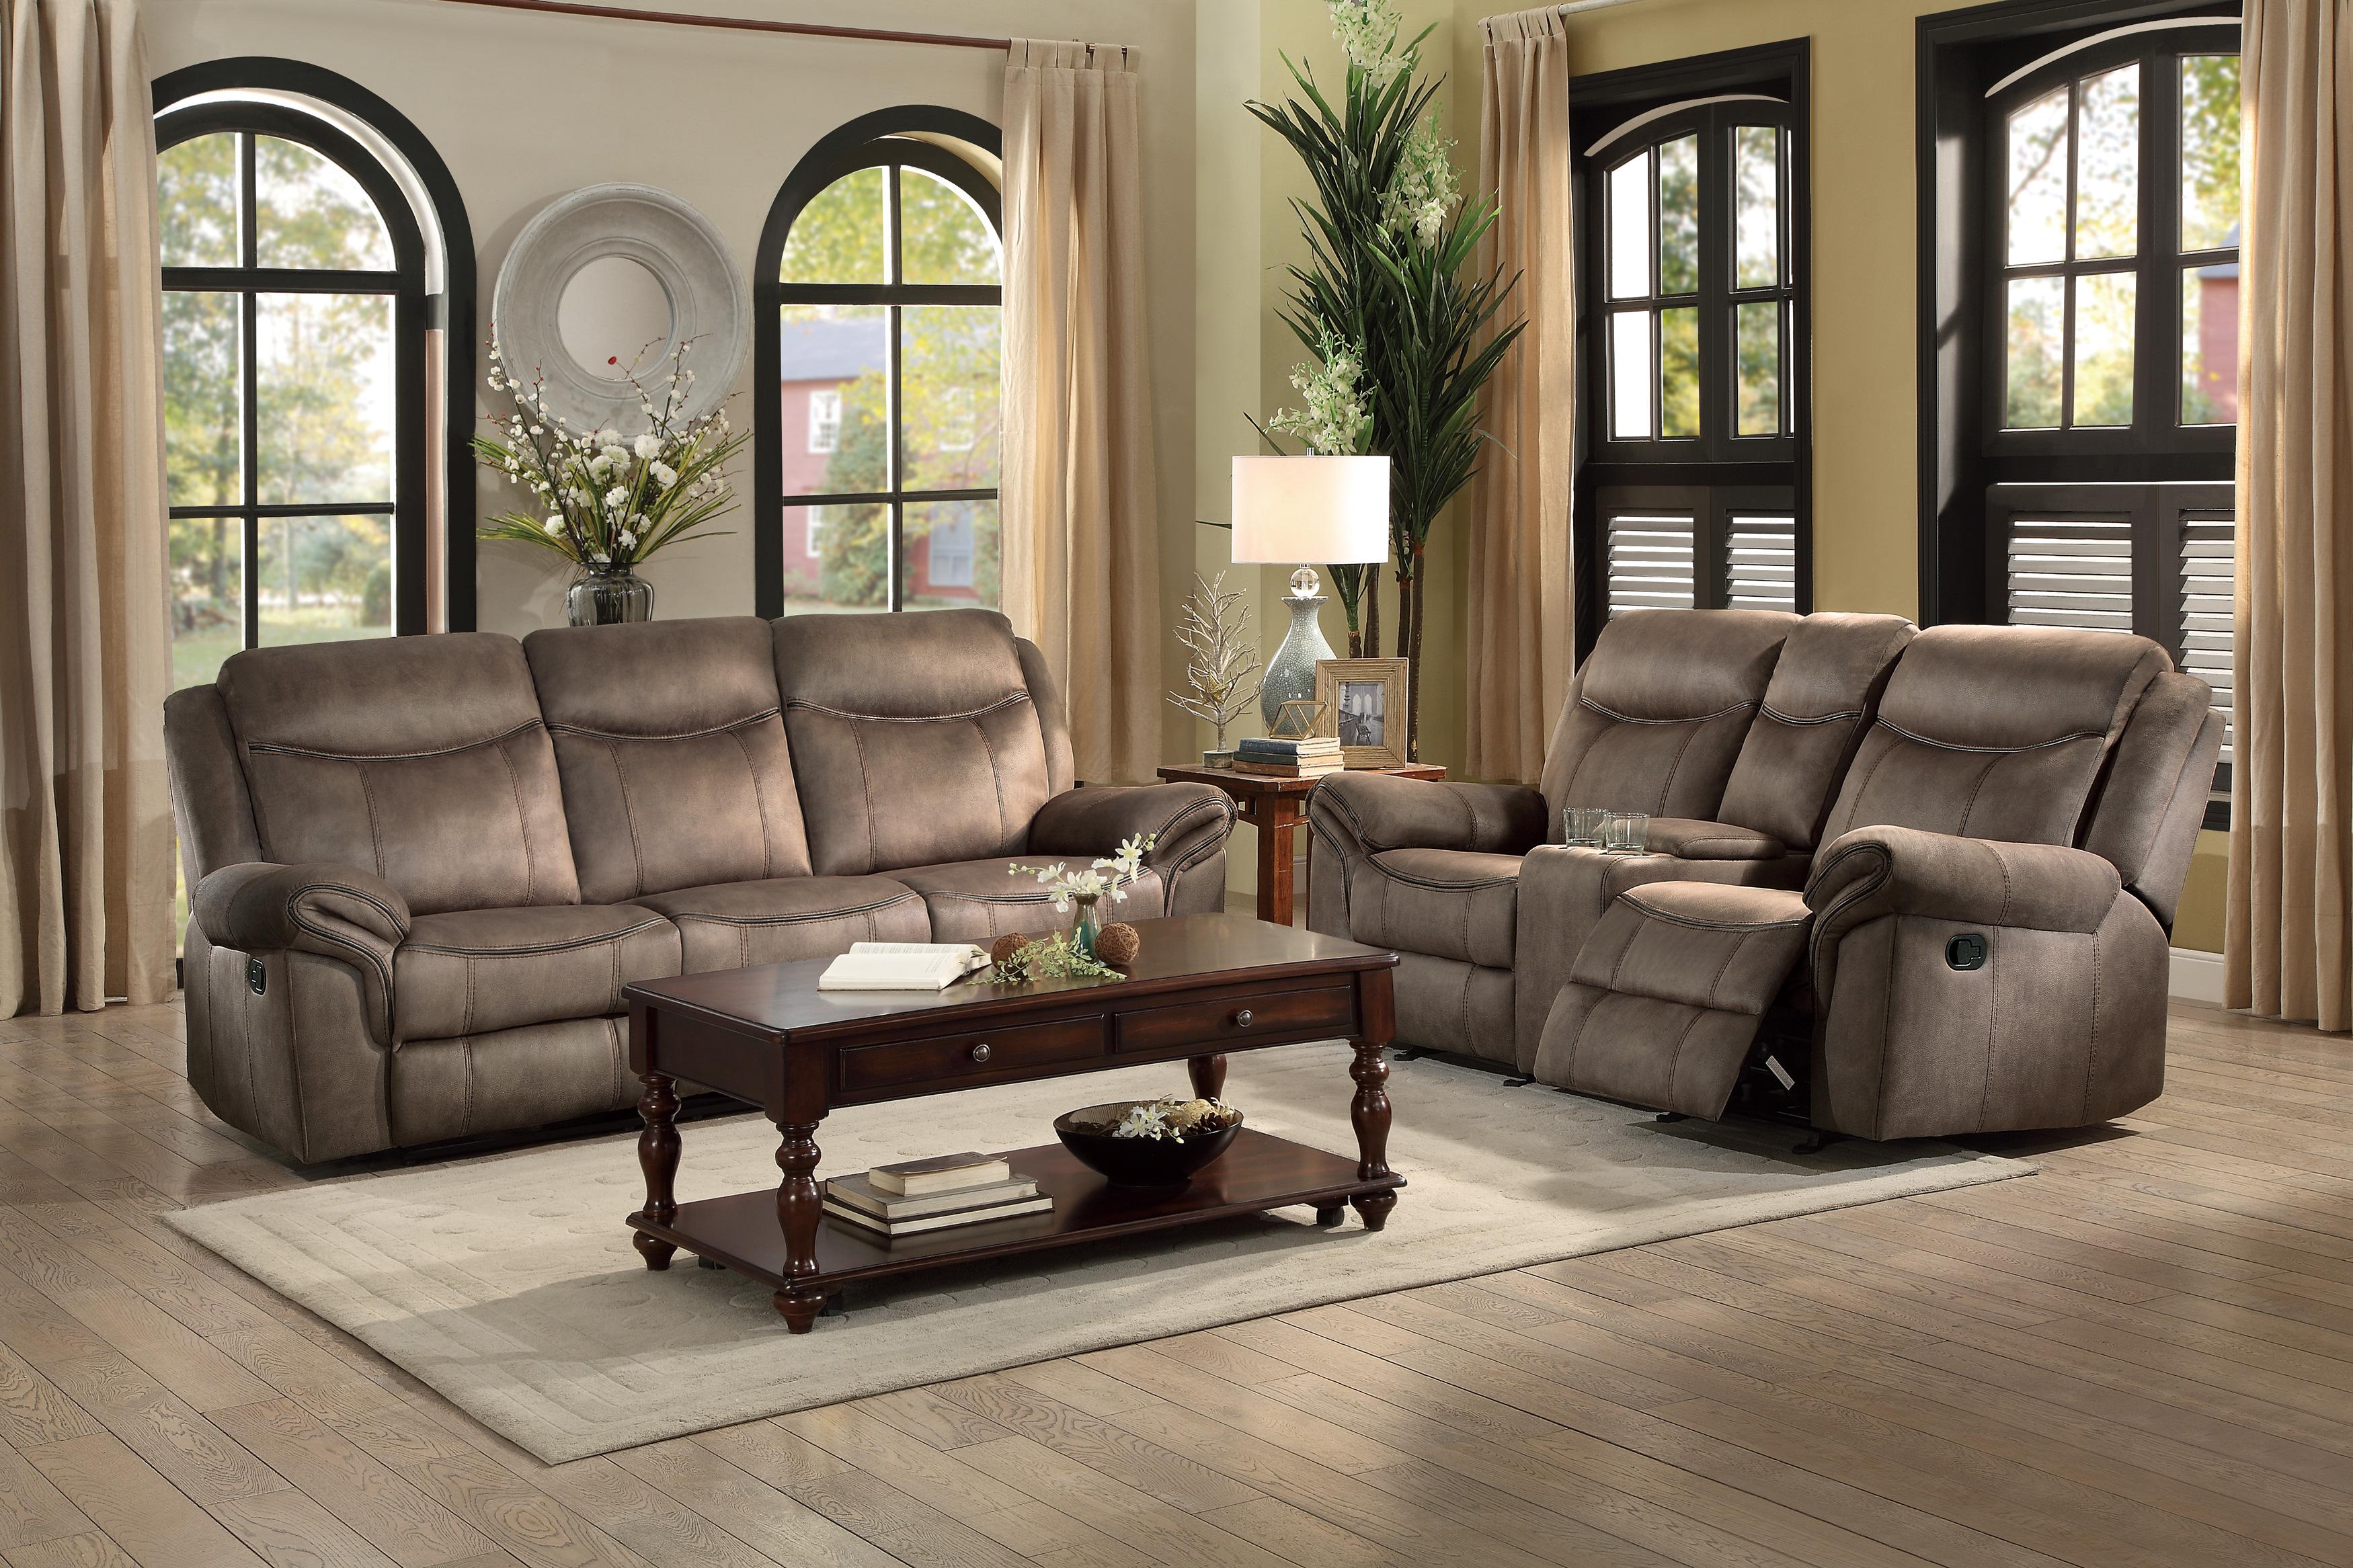 Transitional Reclining Set 8206NF-2PC Aram 8206NF-2PC in Brown Faux Leather